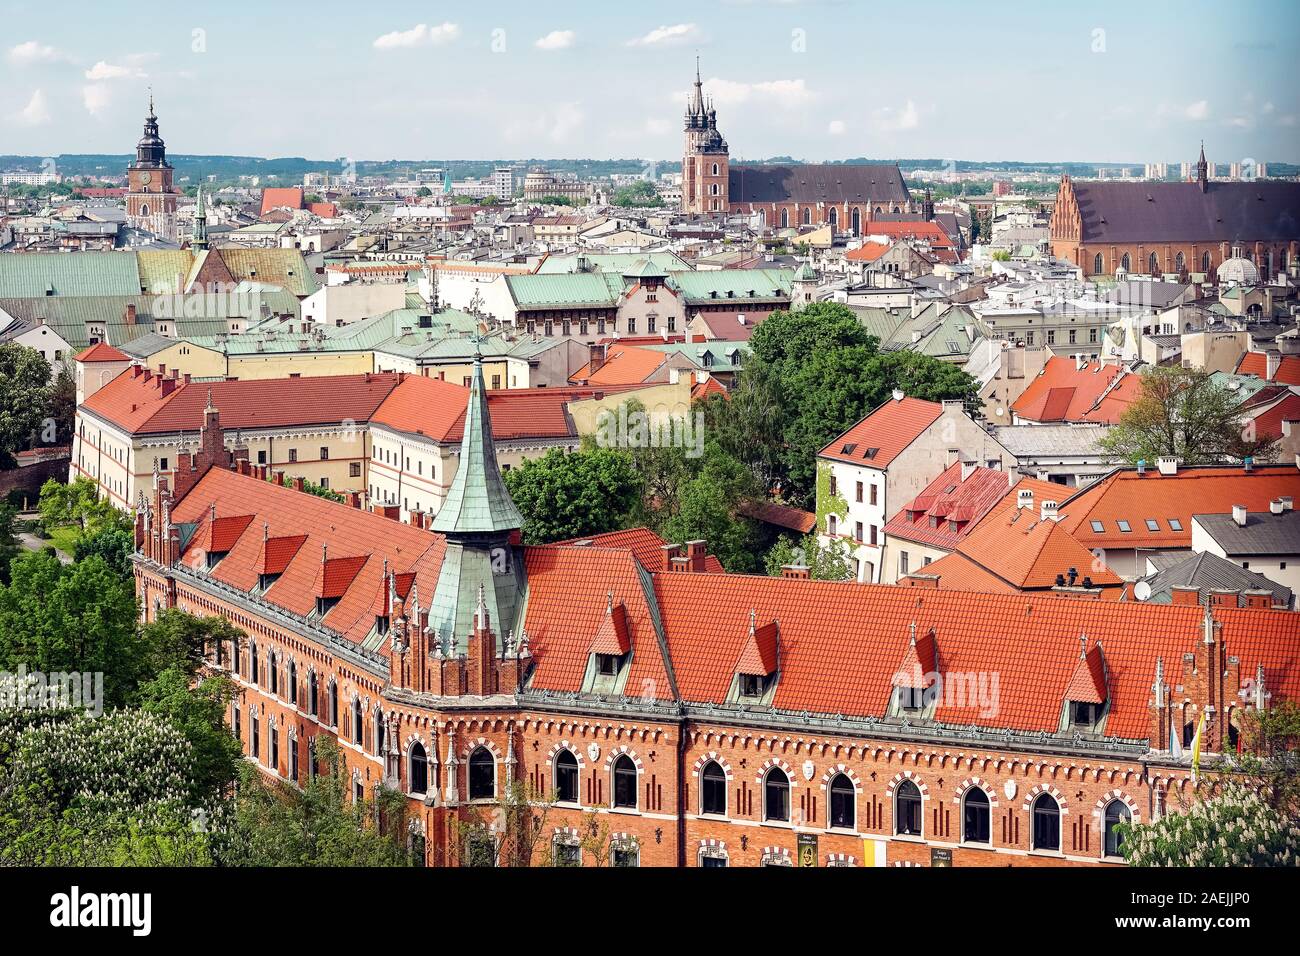 View from Wawel Hill in Krakow. Old Town. In the foreground is a Seminary of the Archdiocese. In the center in the distance - St. Mary's Basilica. Stock Photo